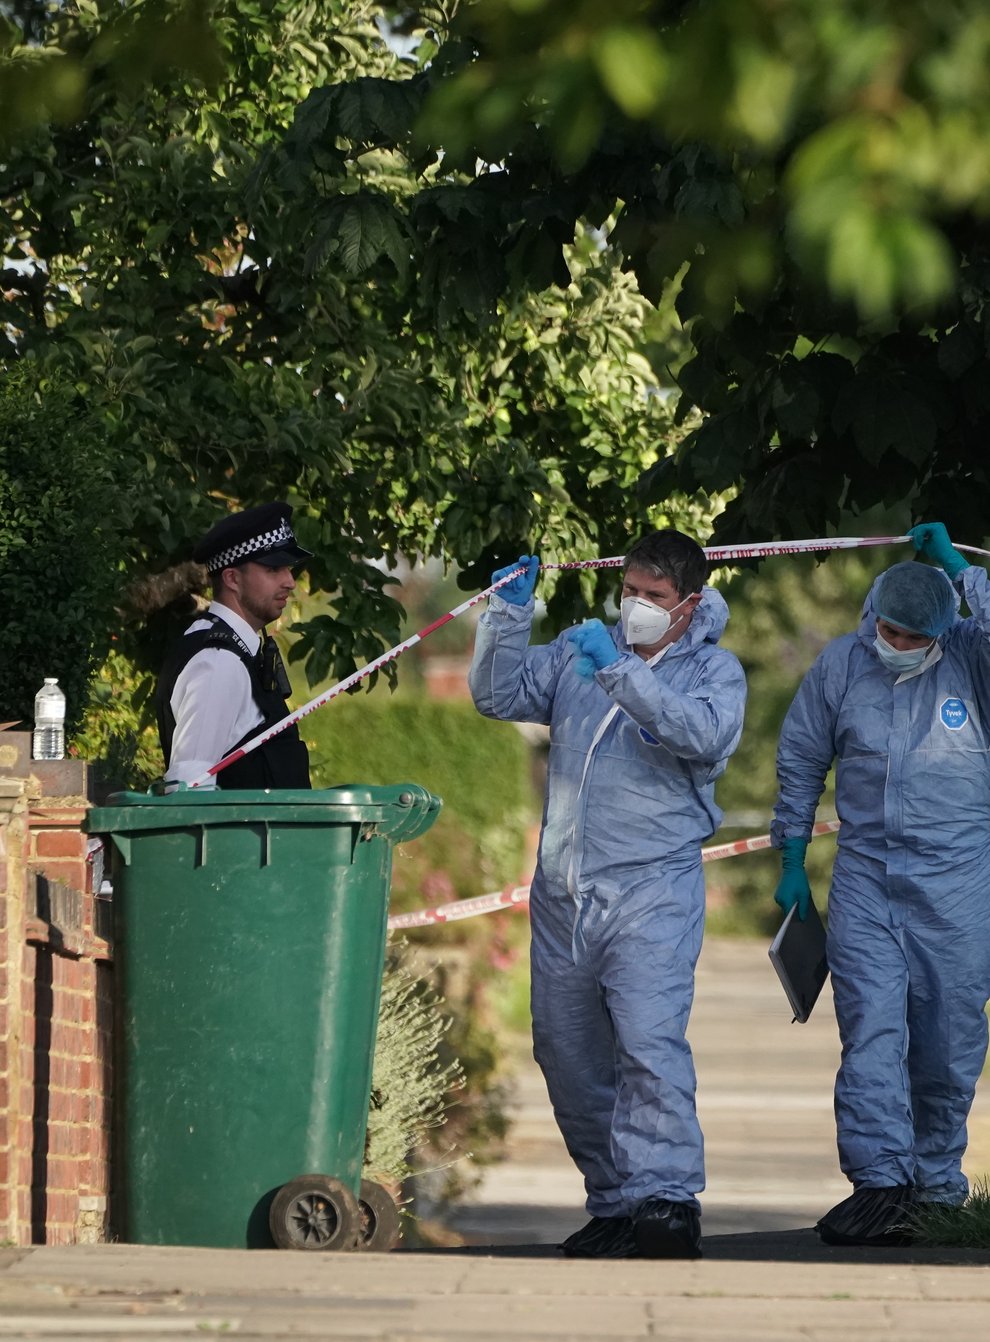 Forensic Officers at the scene in Brookside South, Barnet, north London, after a 37-year-old woman and five-year-old child were found fatally stabbed. The Metropolitan Police said the pair, believed to be mother and son, were pronounced dead at the scene and a 37-year old man, believed to have been known to the victims, has been arrested on suspicion of murder. Picture date: Tuesday June 21, 2022 (Lucas Cumiskey/PA)